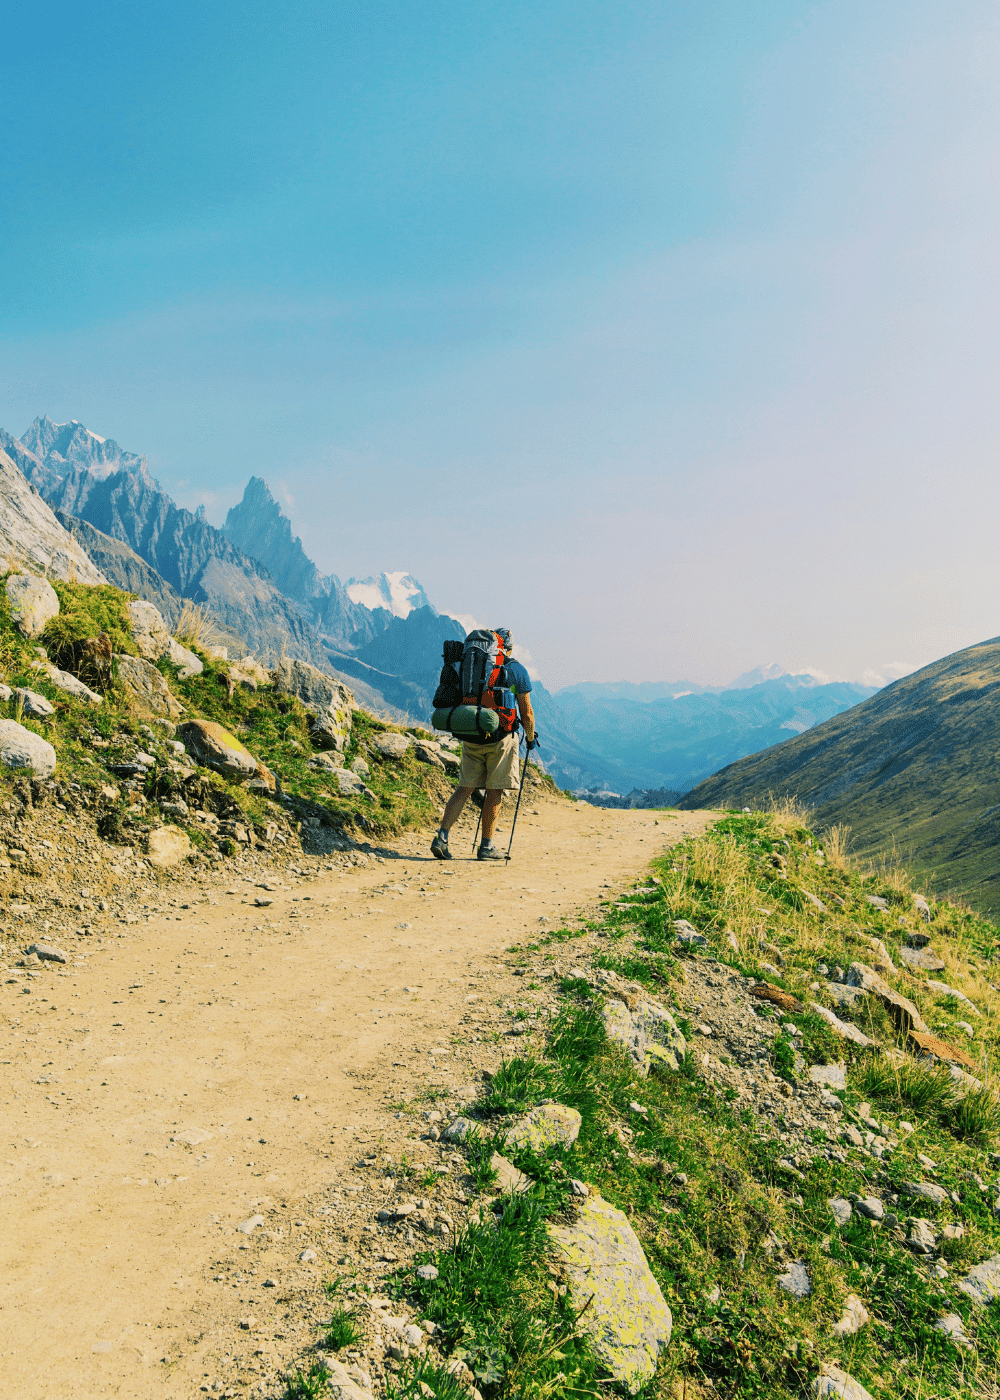 When Is The Best Time to Trek the Tour Du Mont Blanc? - benefits of trekking